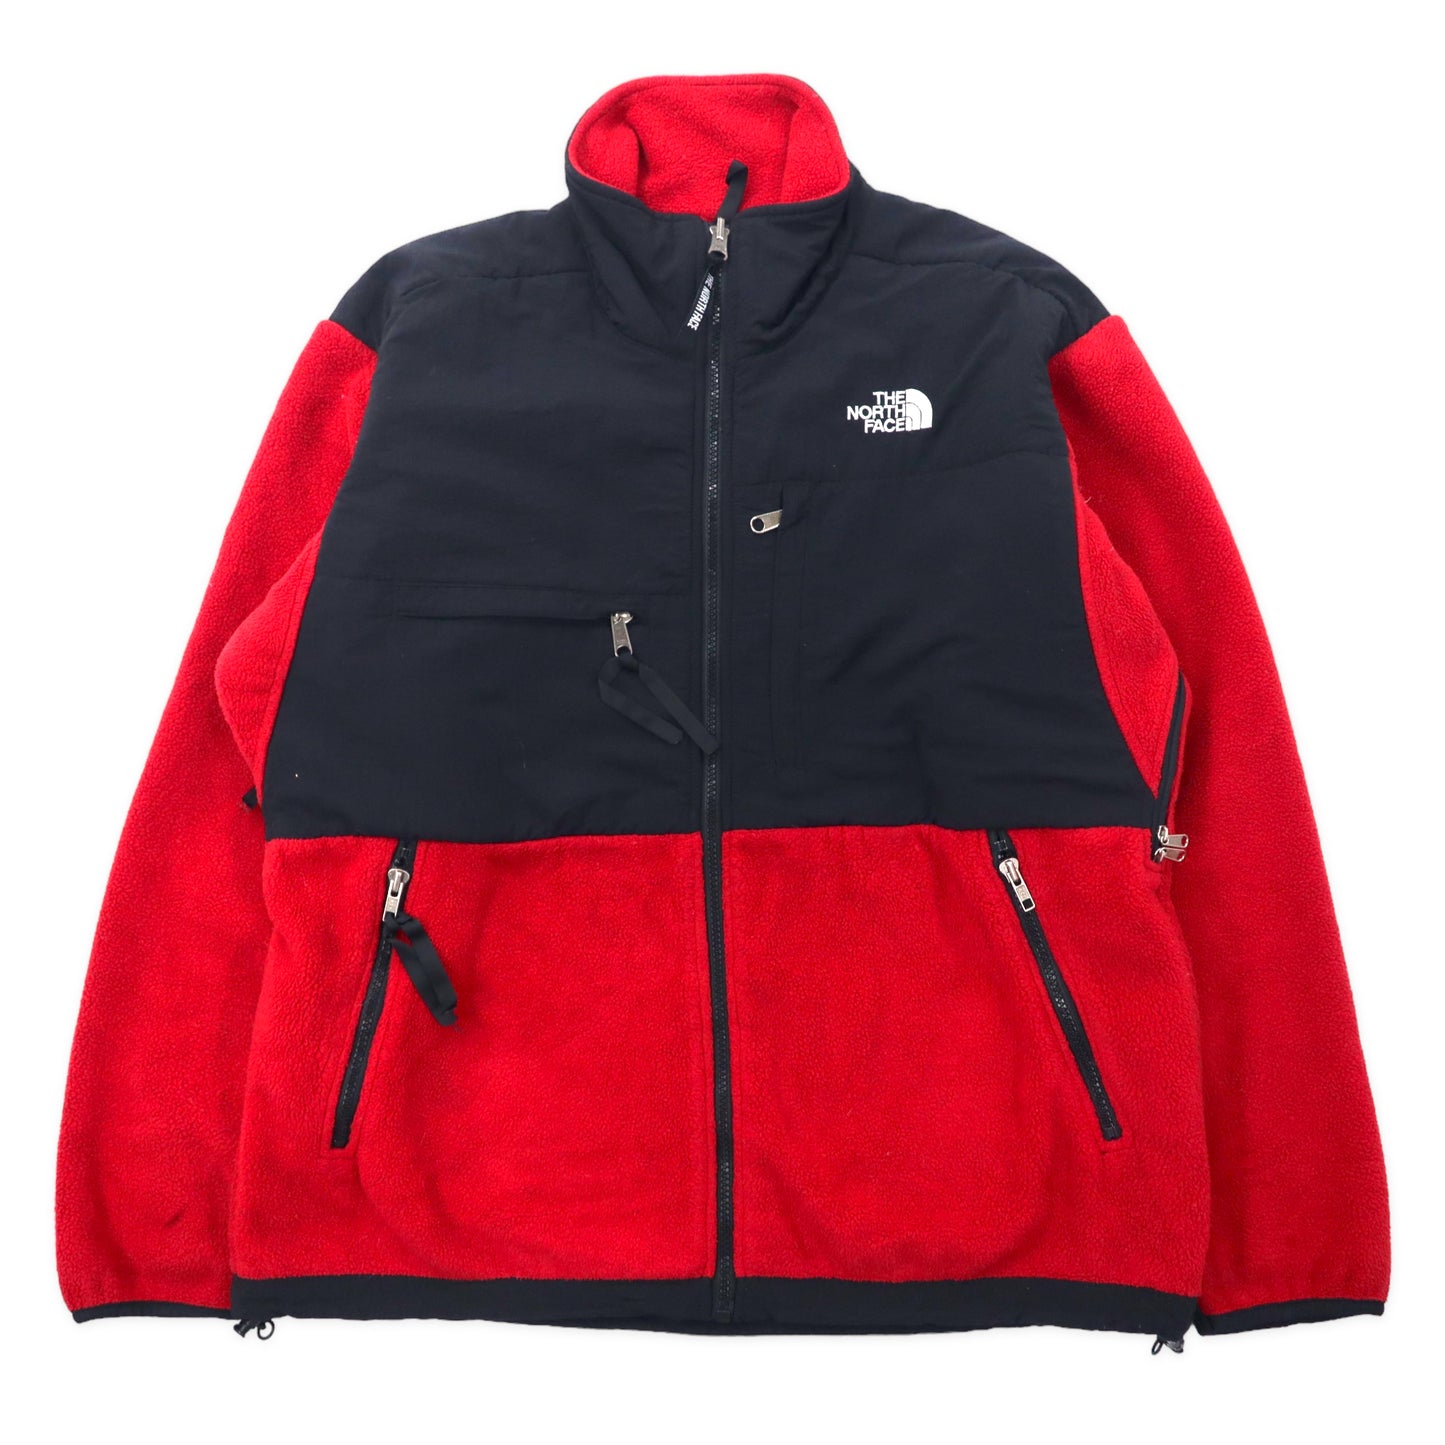 USA MADE THE NORTH FACE FLEECE Jacket M Red Black Polyester 